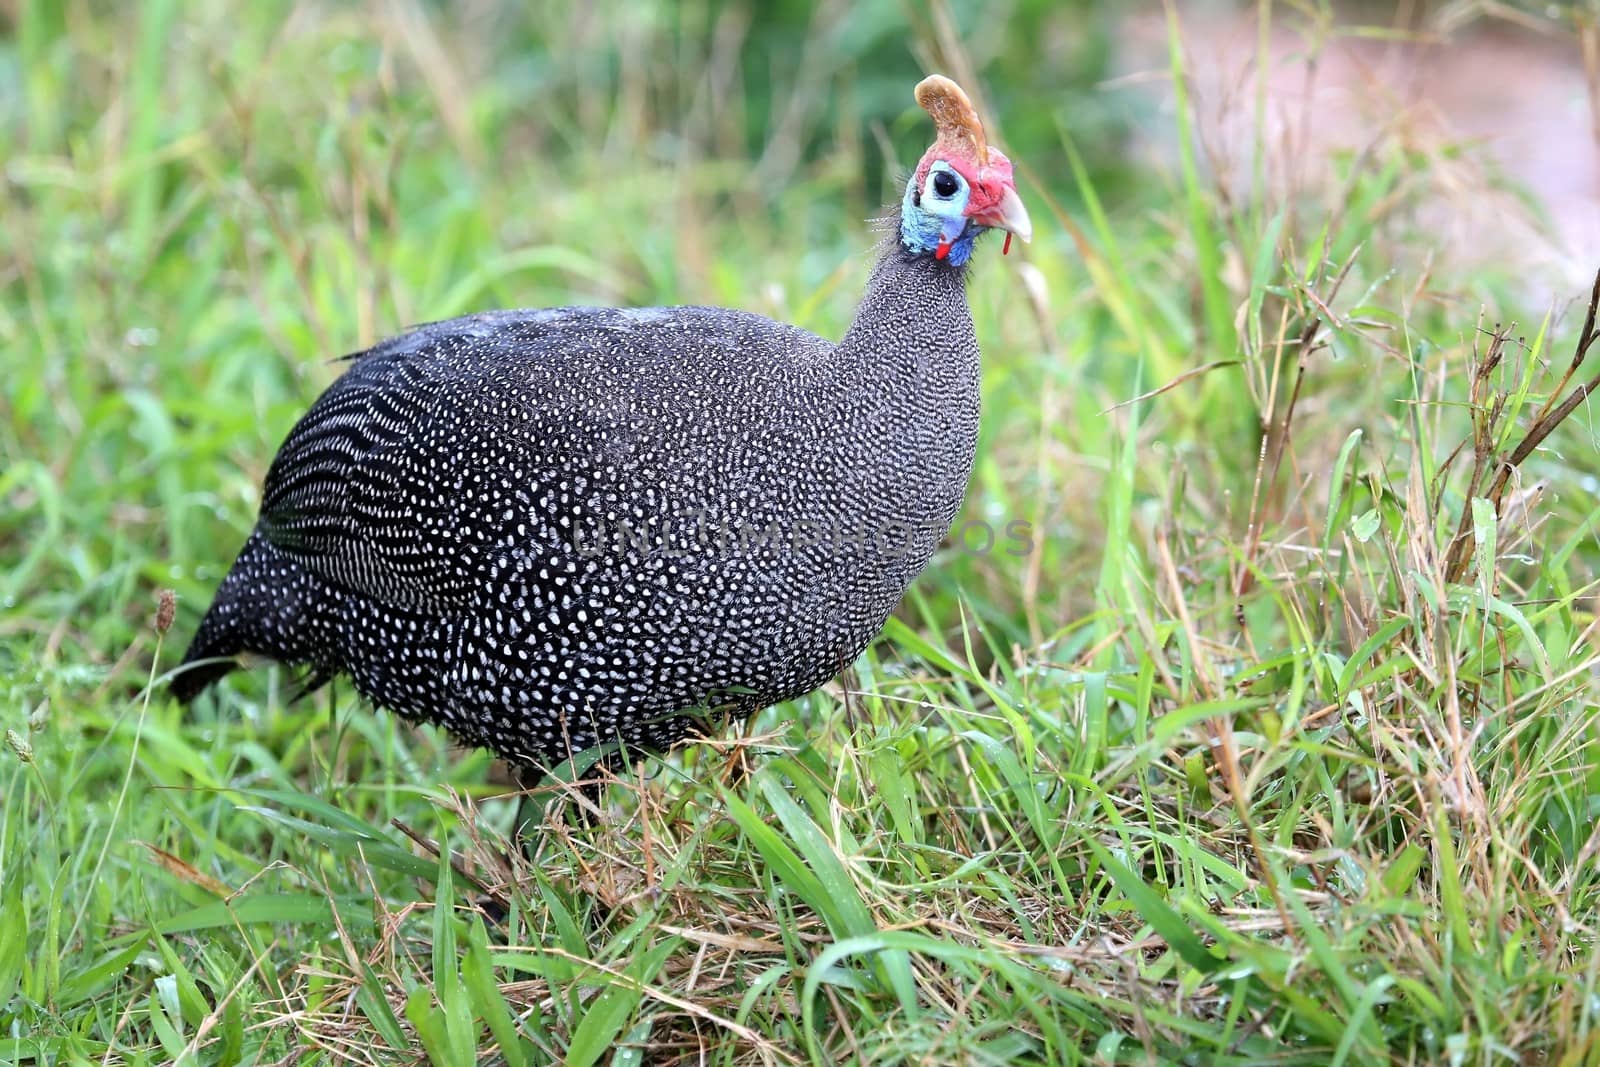 Beautiful Guinea Fowl Bird or Helmeted Guinea fowl with white spotted feathers.